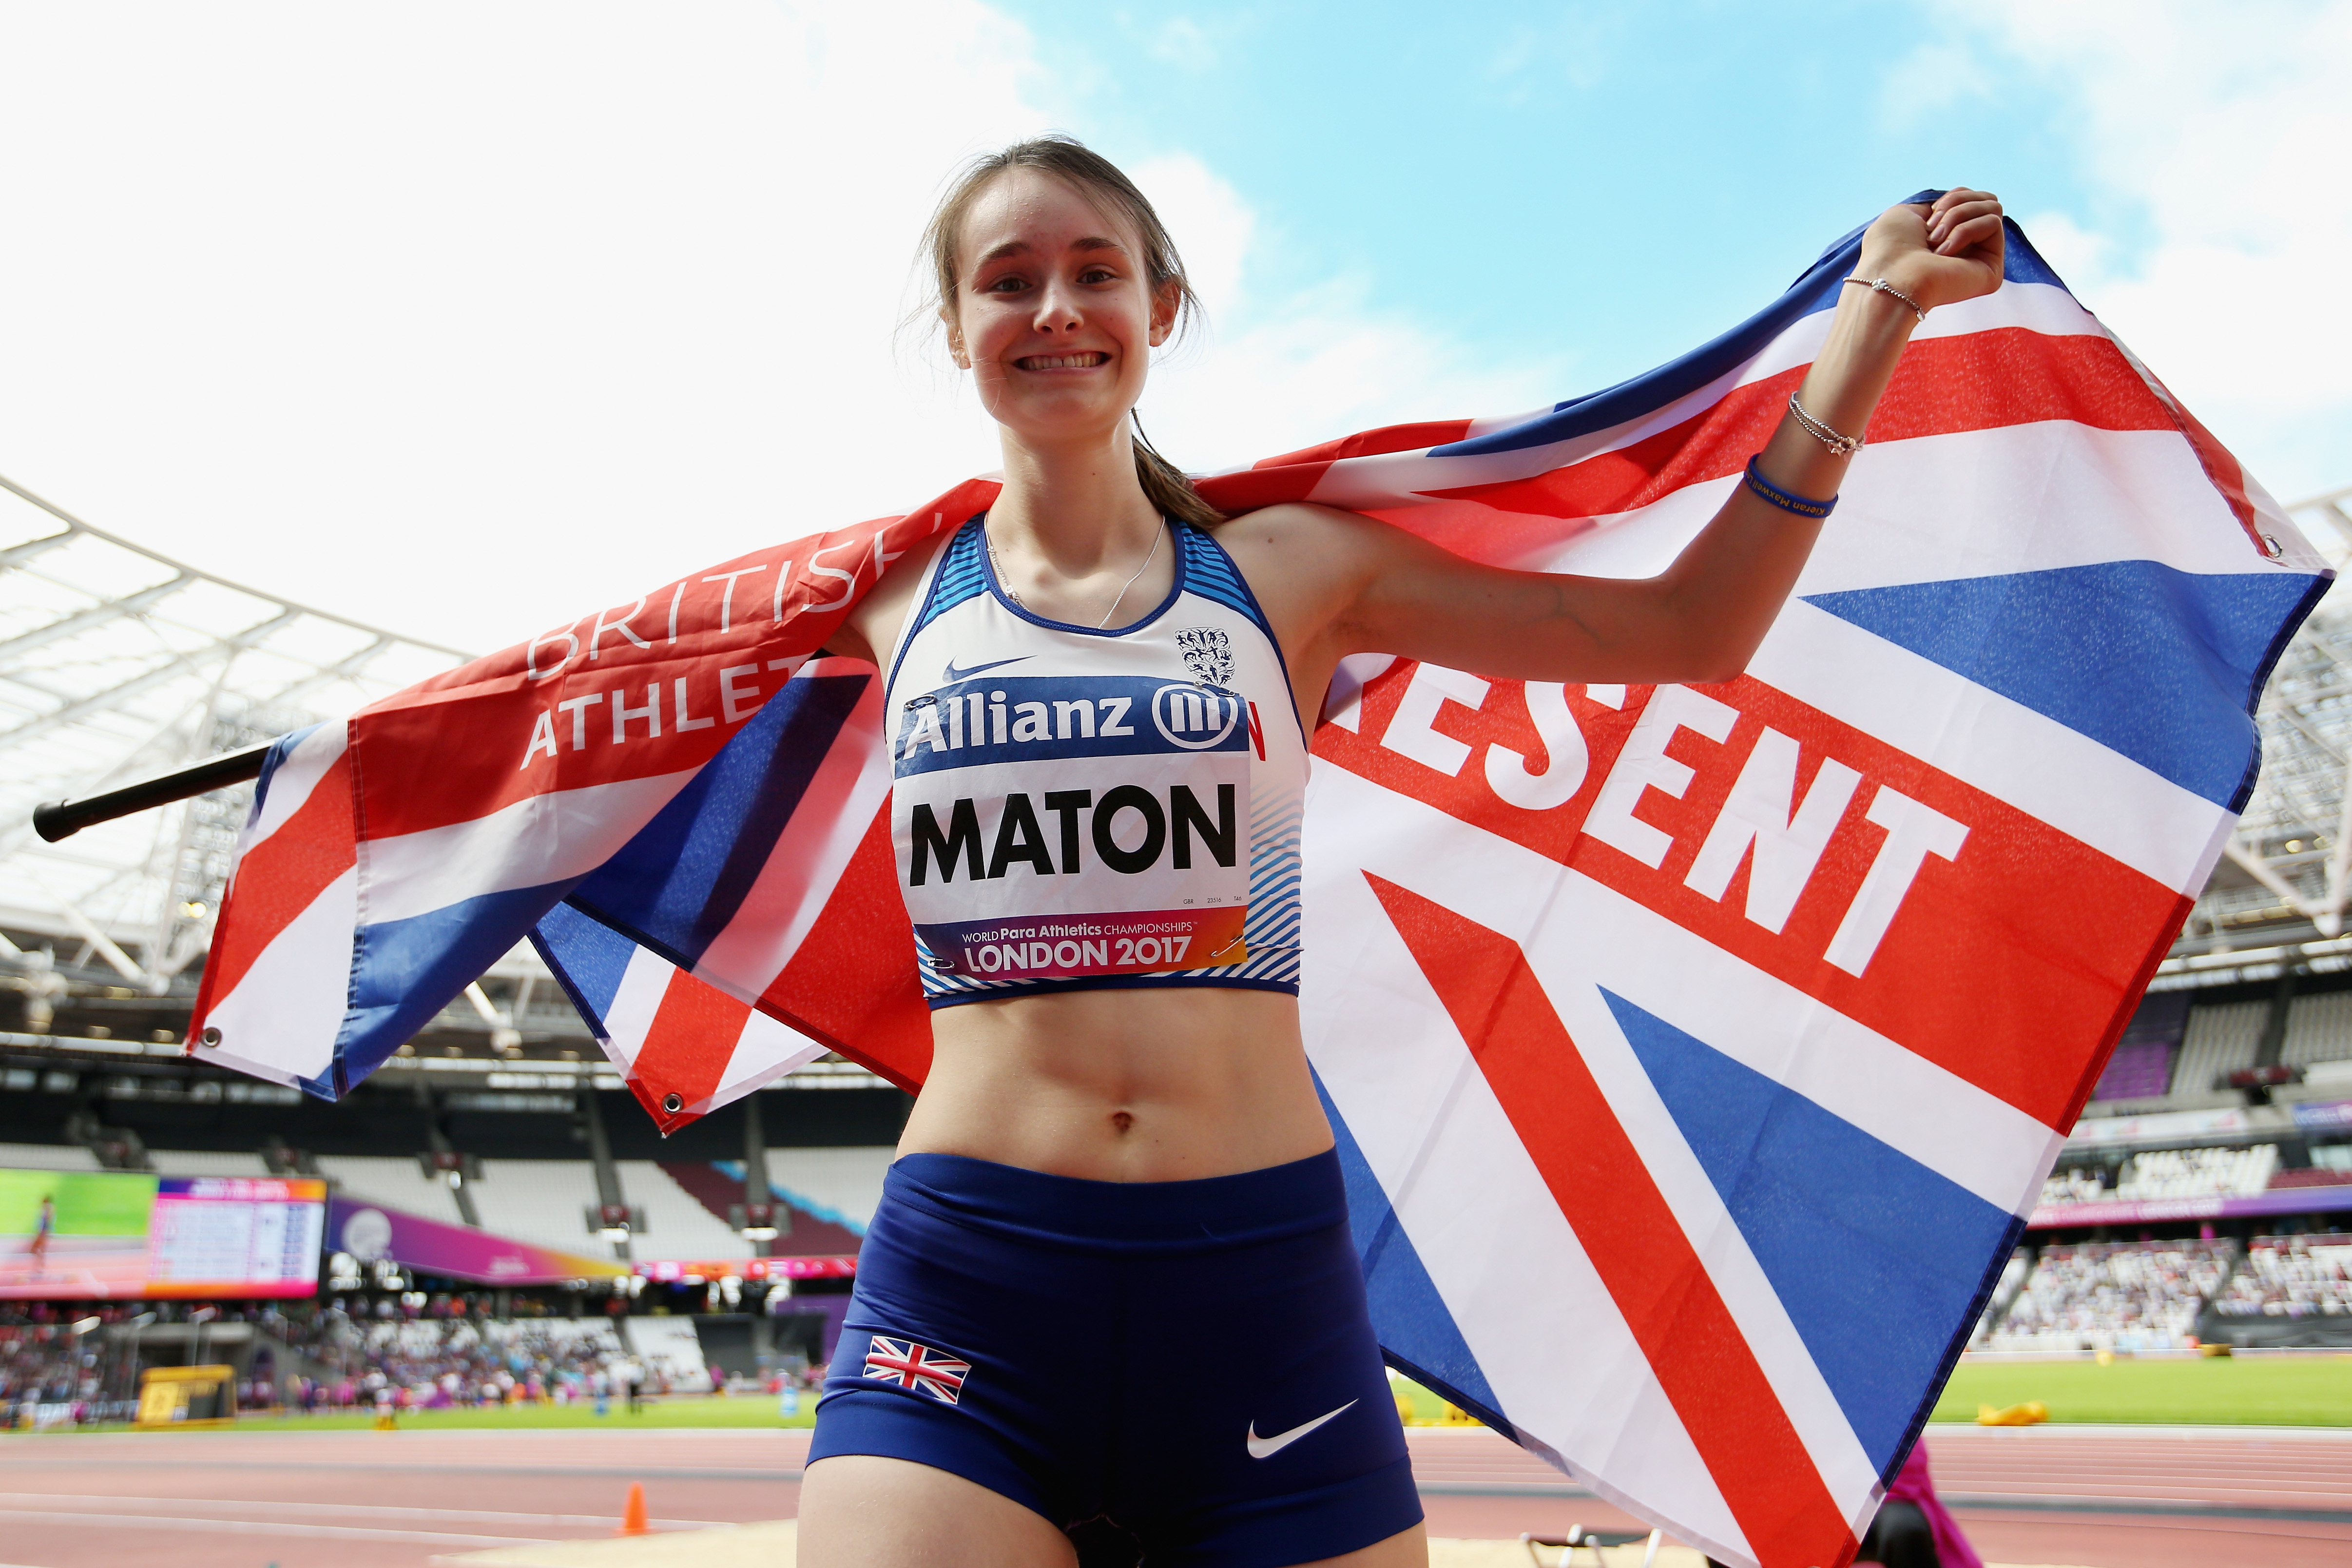 POLLY MATON ON THE BALANCE BETWEEN LIFE ON AND AWAY FROM THE LONG JUMP PIT